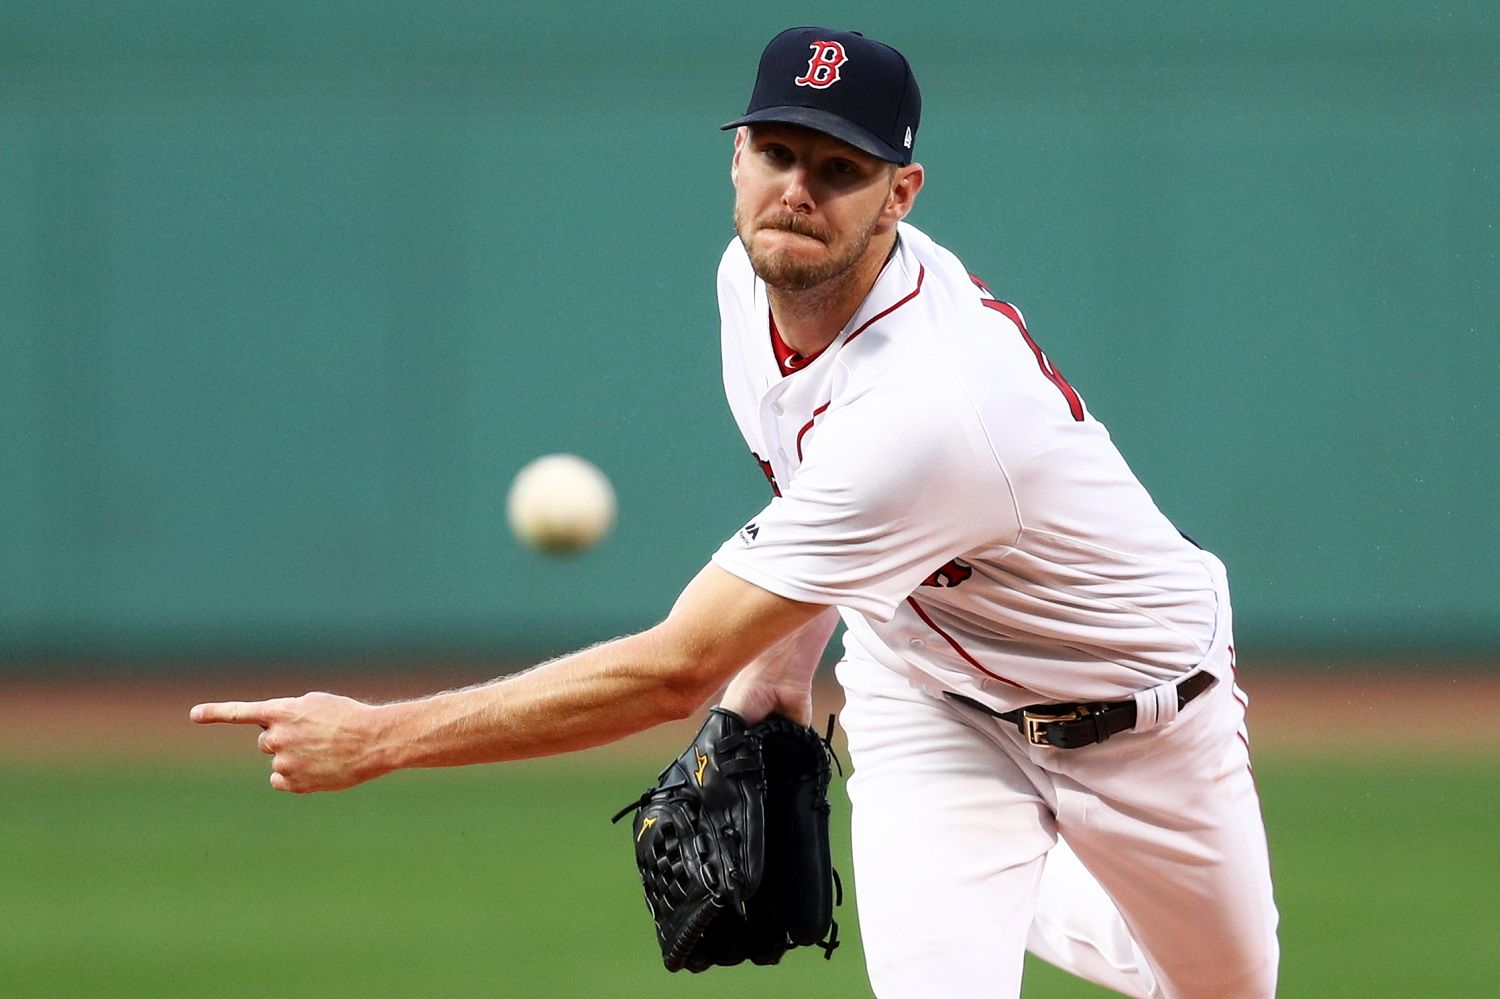 BOSTON, MA - AUGUST 1: Chris Sale #41 of the Boston Red Sox pitches against the Cleveland Indians during the first inning at Fenway Park on August 1, 2017 in Boston, Massachusetts. (Photo by Maddie Meyer/Getty Images)